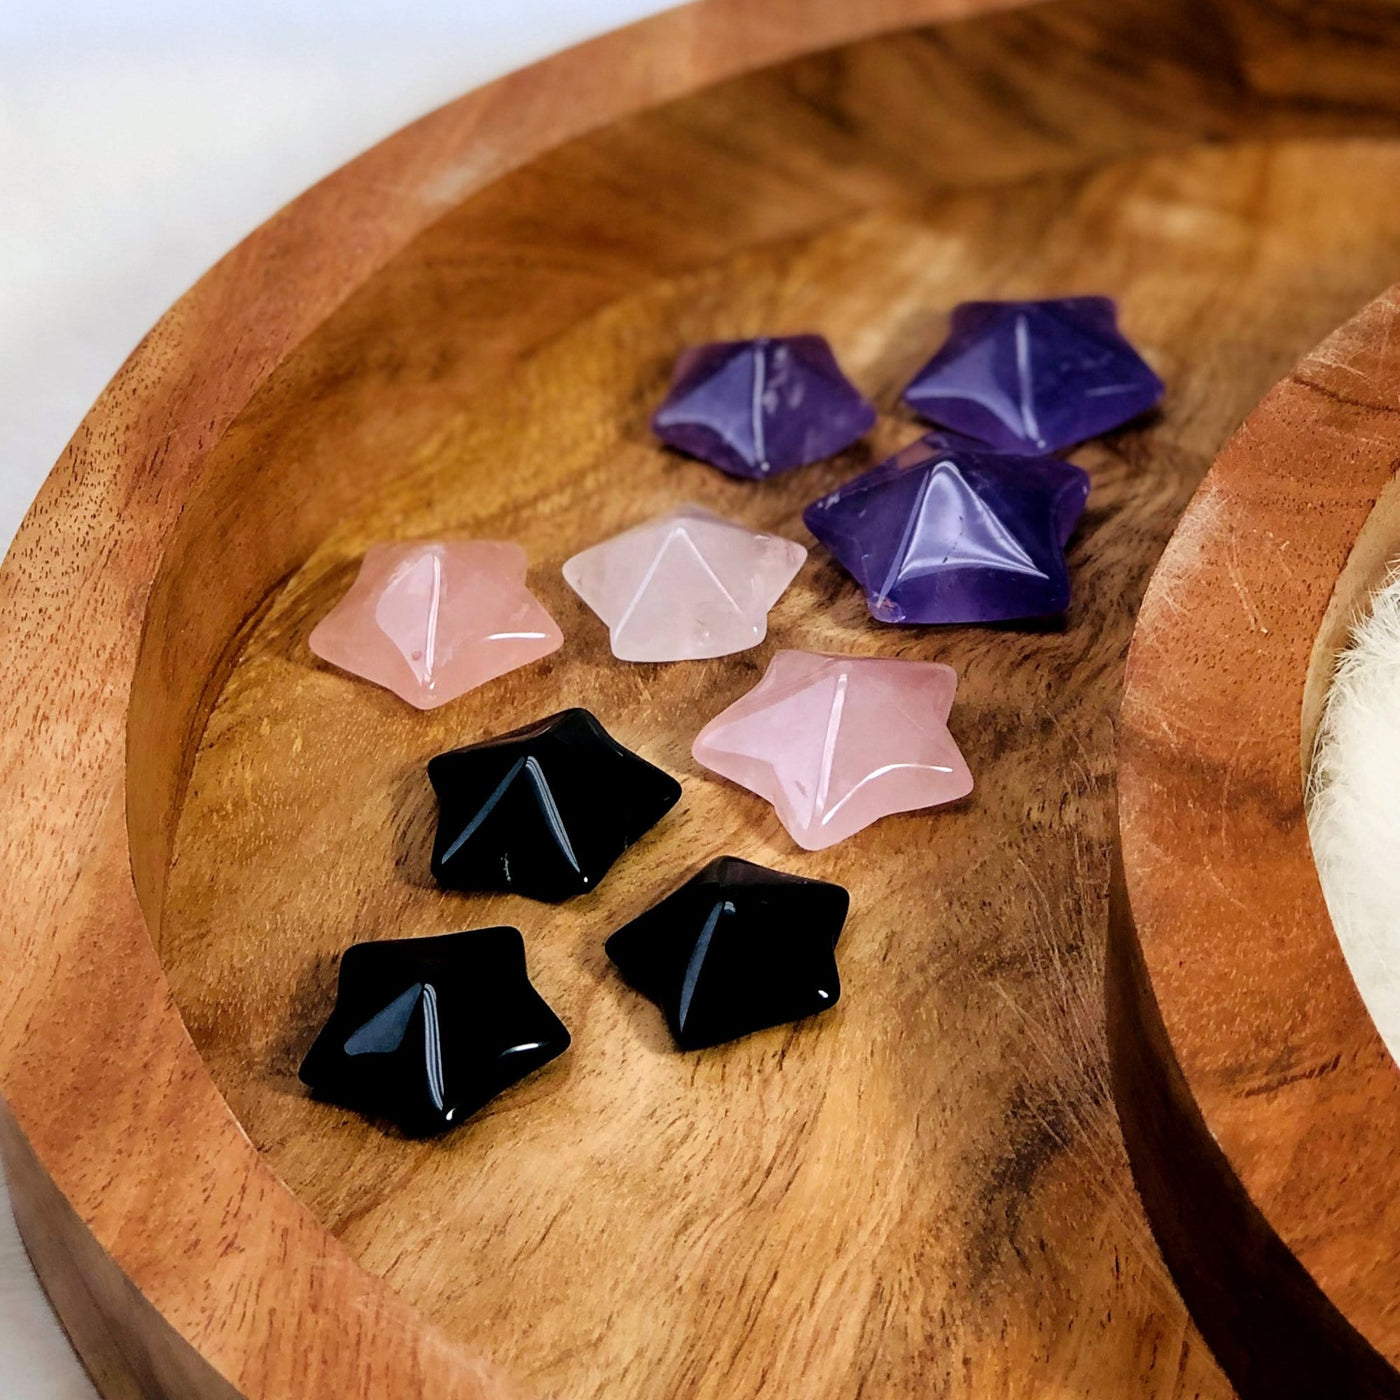 Up close angled view of Nine Puffy Star Cabochon Gemstones displayed on a wooden moon shaped tray, black, purple and pink - three of each.